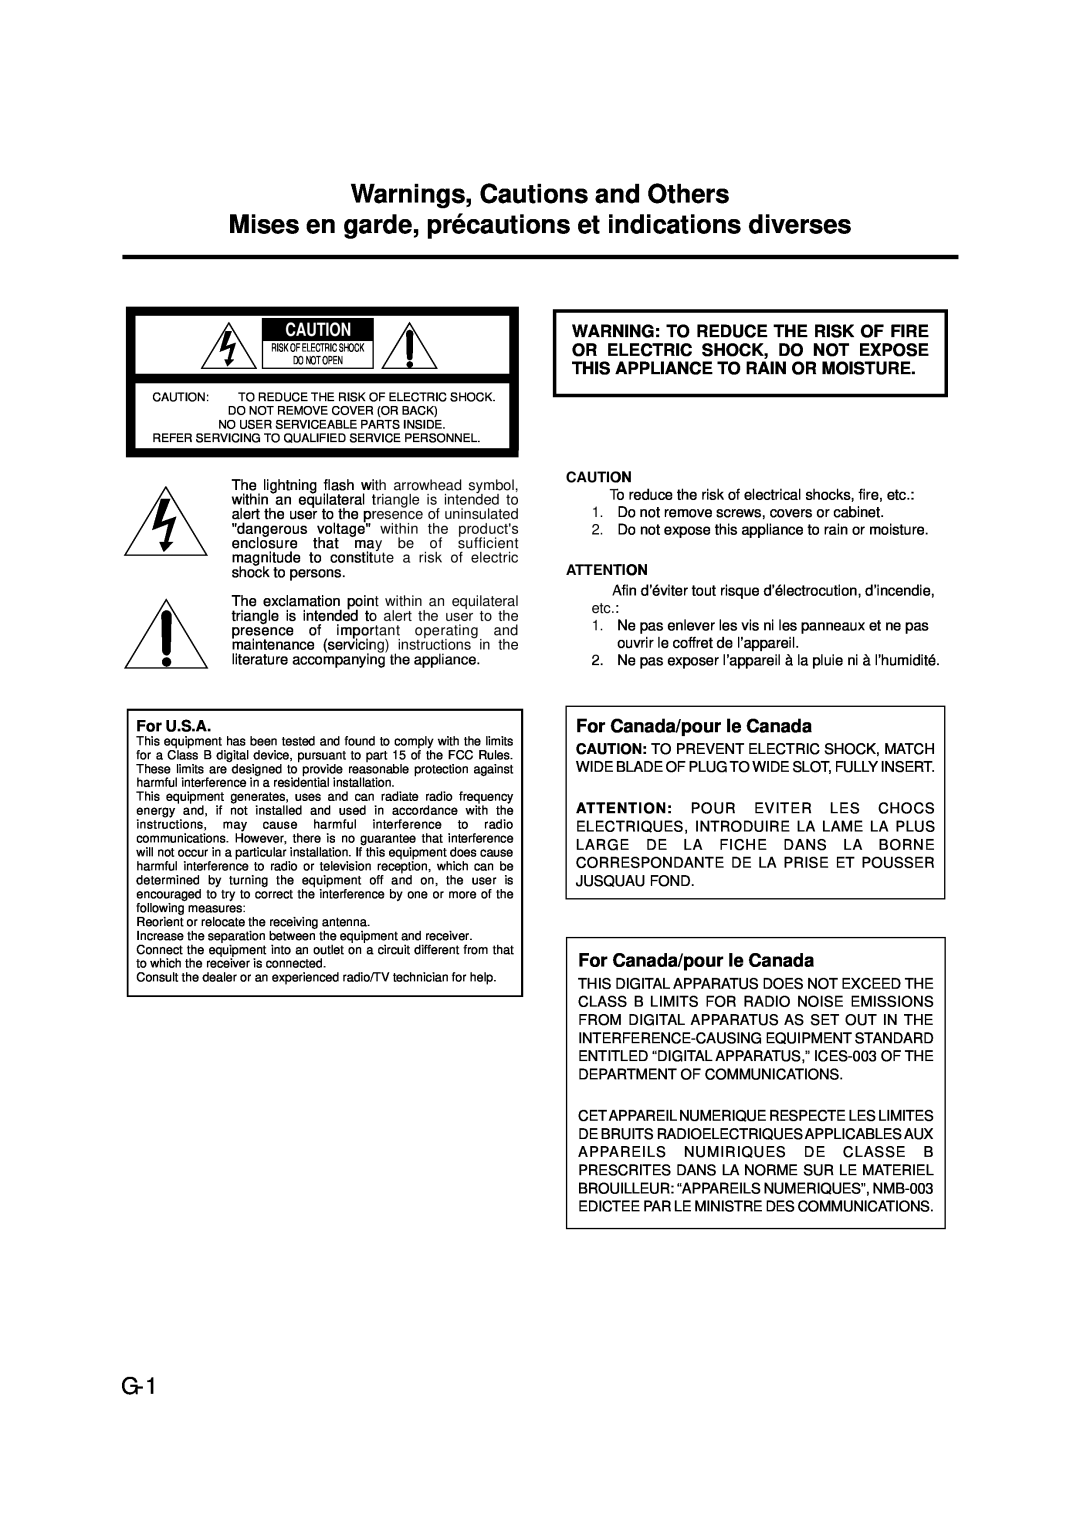 JVC XT-UXG6, LVT0375-001A, FS-G6 manual For Canada/pour le Canada, Warnings, Cautions and Others, For U.S.A 